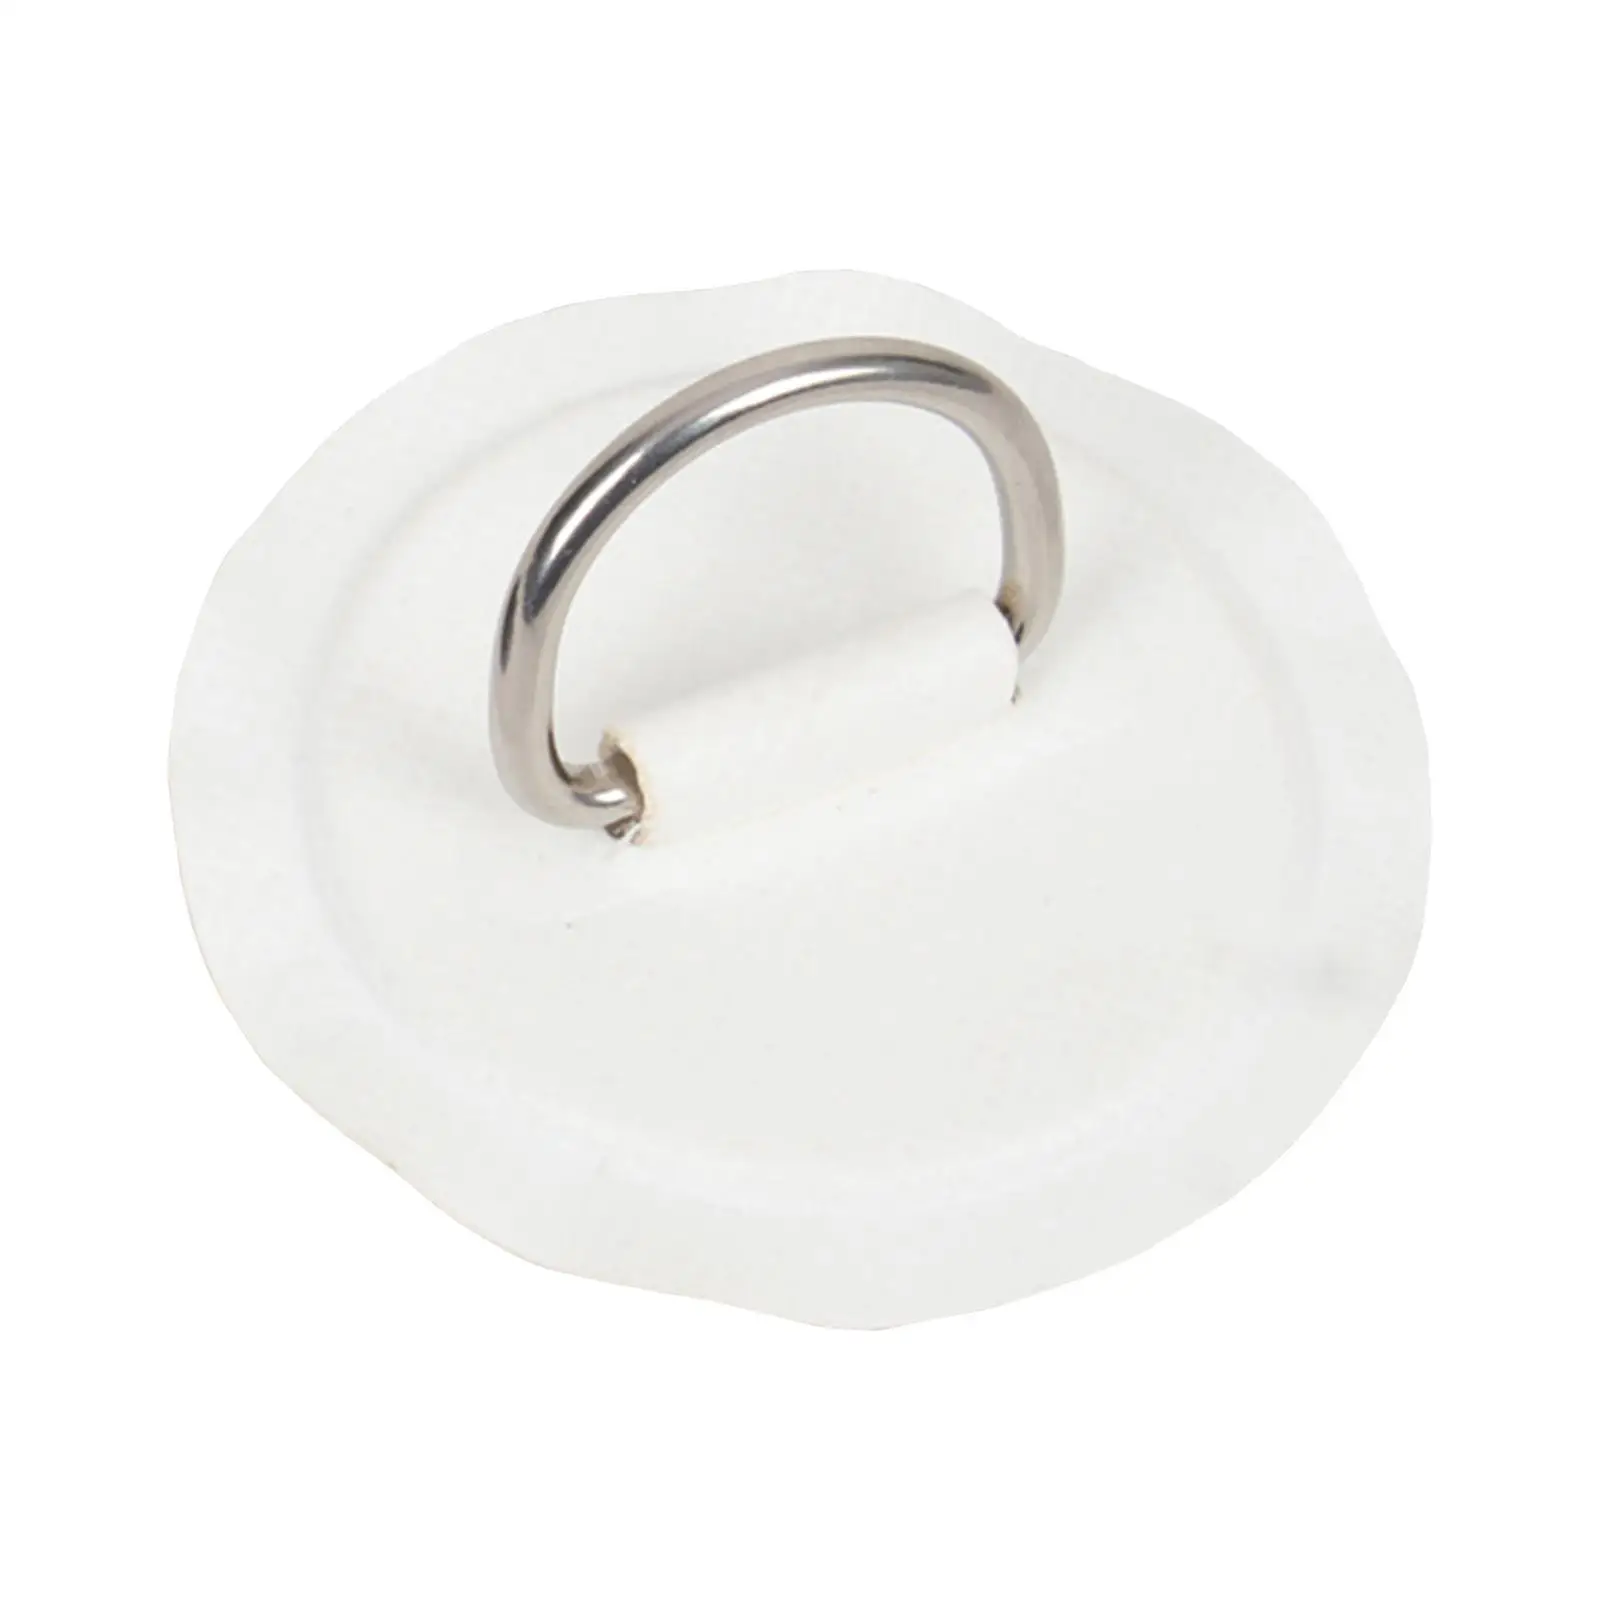 Round D Ring Patch - No Glue Included- 3.1 inch Bow Ring Watercraft Parts for PVC Inflatable Boat Rigging Canoe Deck Sailboat